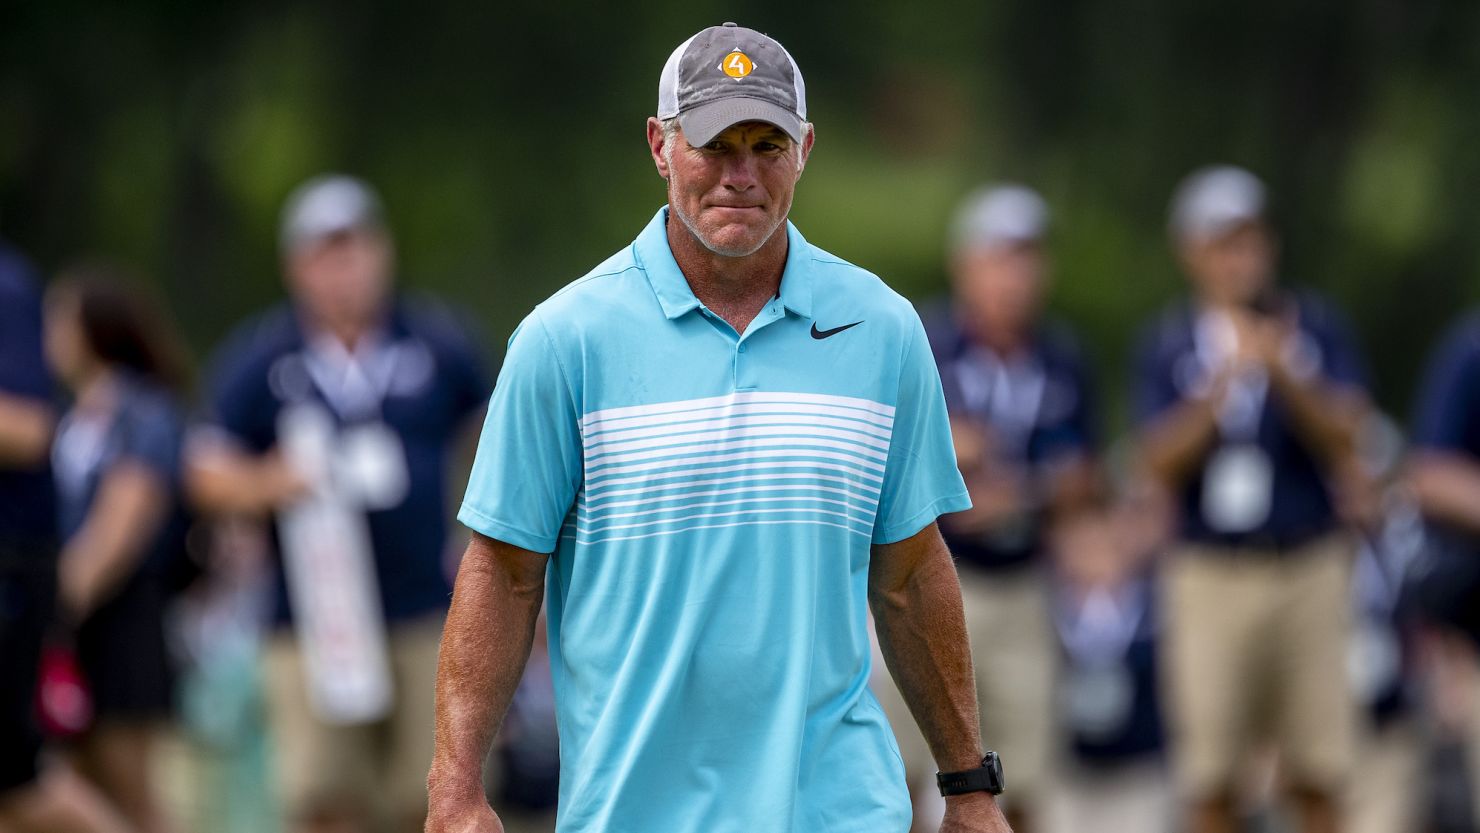 Former Green Bay Packer quarterback Brett Favre at the American Family Insurance Championship on June 23, 2018, at the University Ridge Golf Course in Madison, Wisconsin. Attorneys for Favre filed a motion Friday asking a judge to dismiss a lawsuit against him by the state of Mississippi.